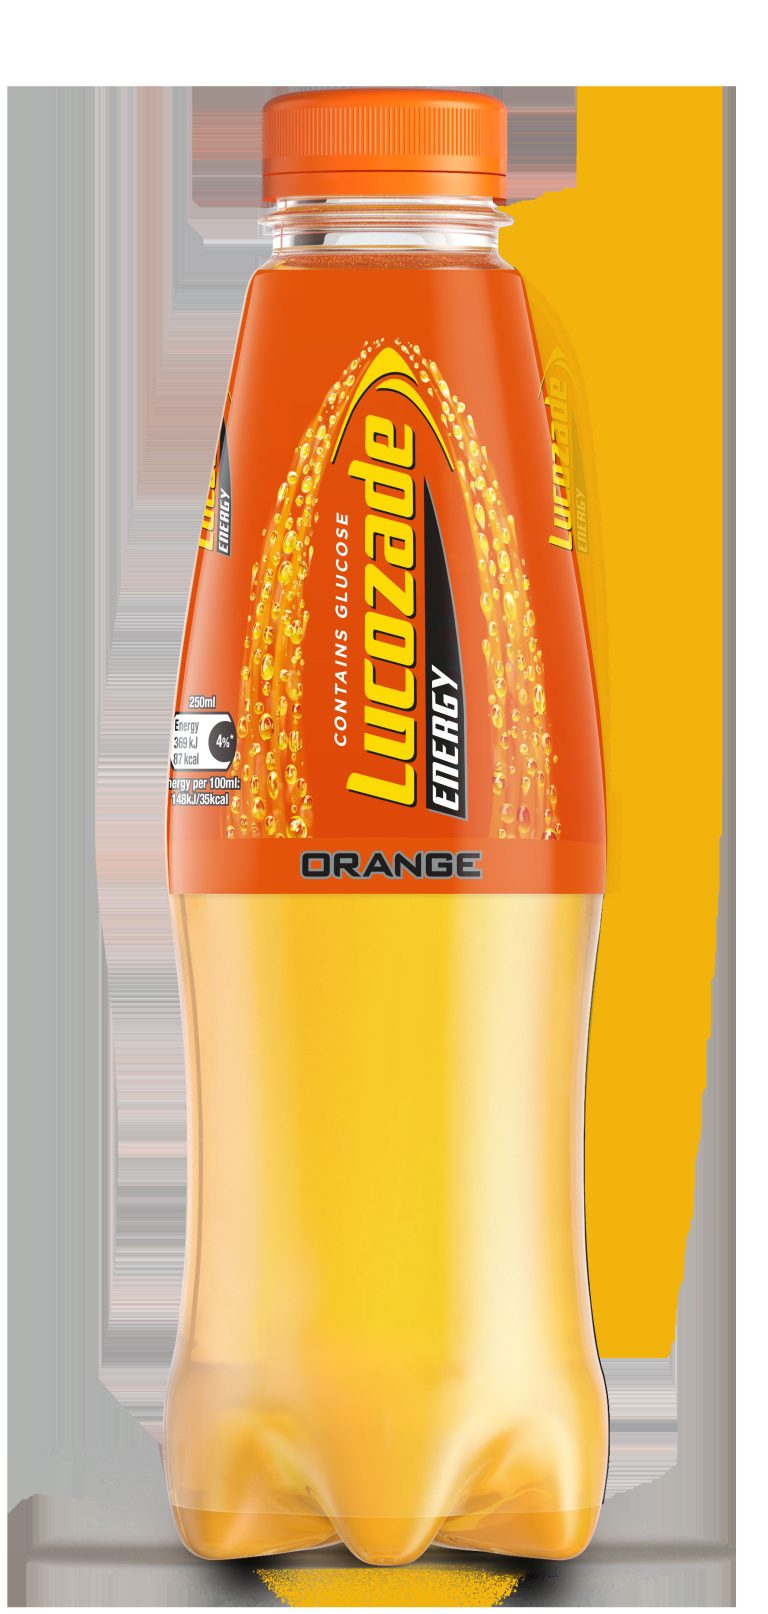 PayPoint and Lucozade launch digital voucher promotion